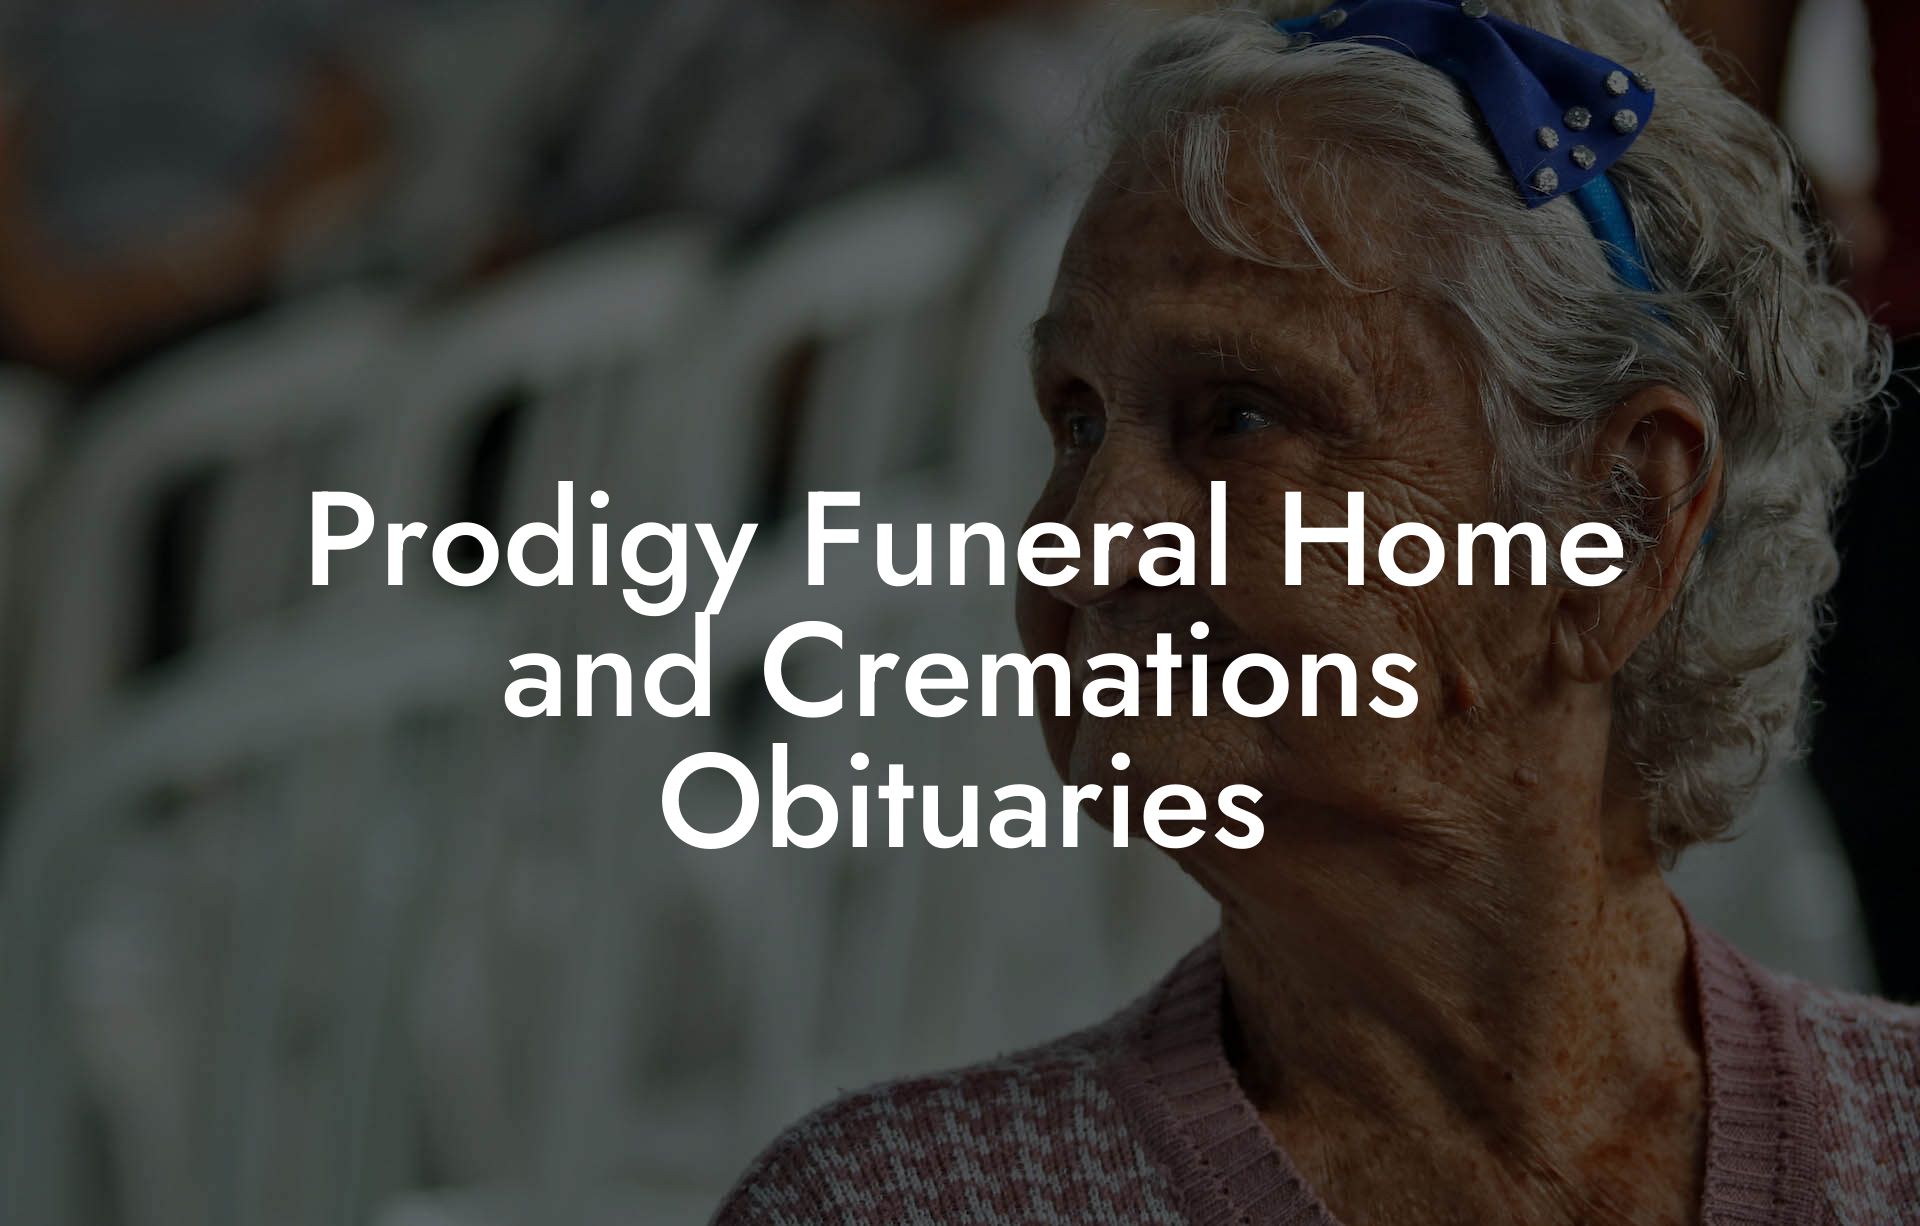 Prodigy Funeral Home and Cremations Obituaries